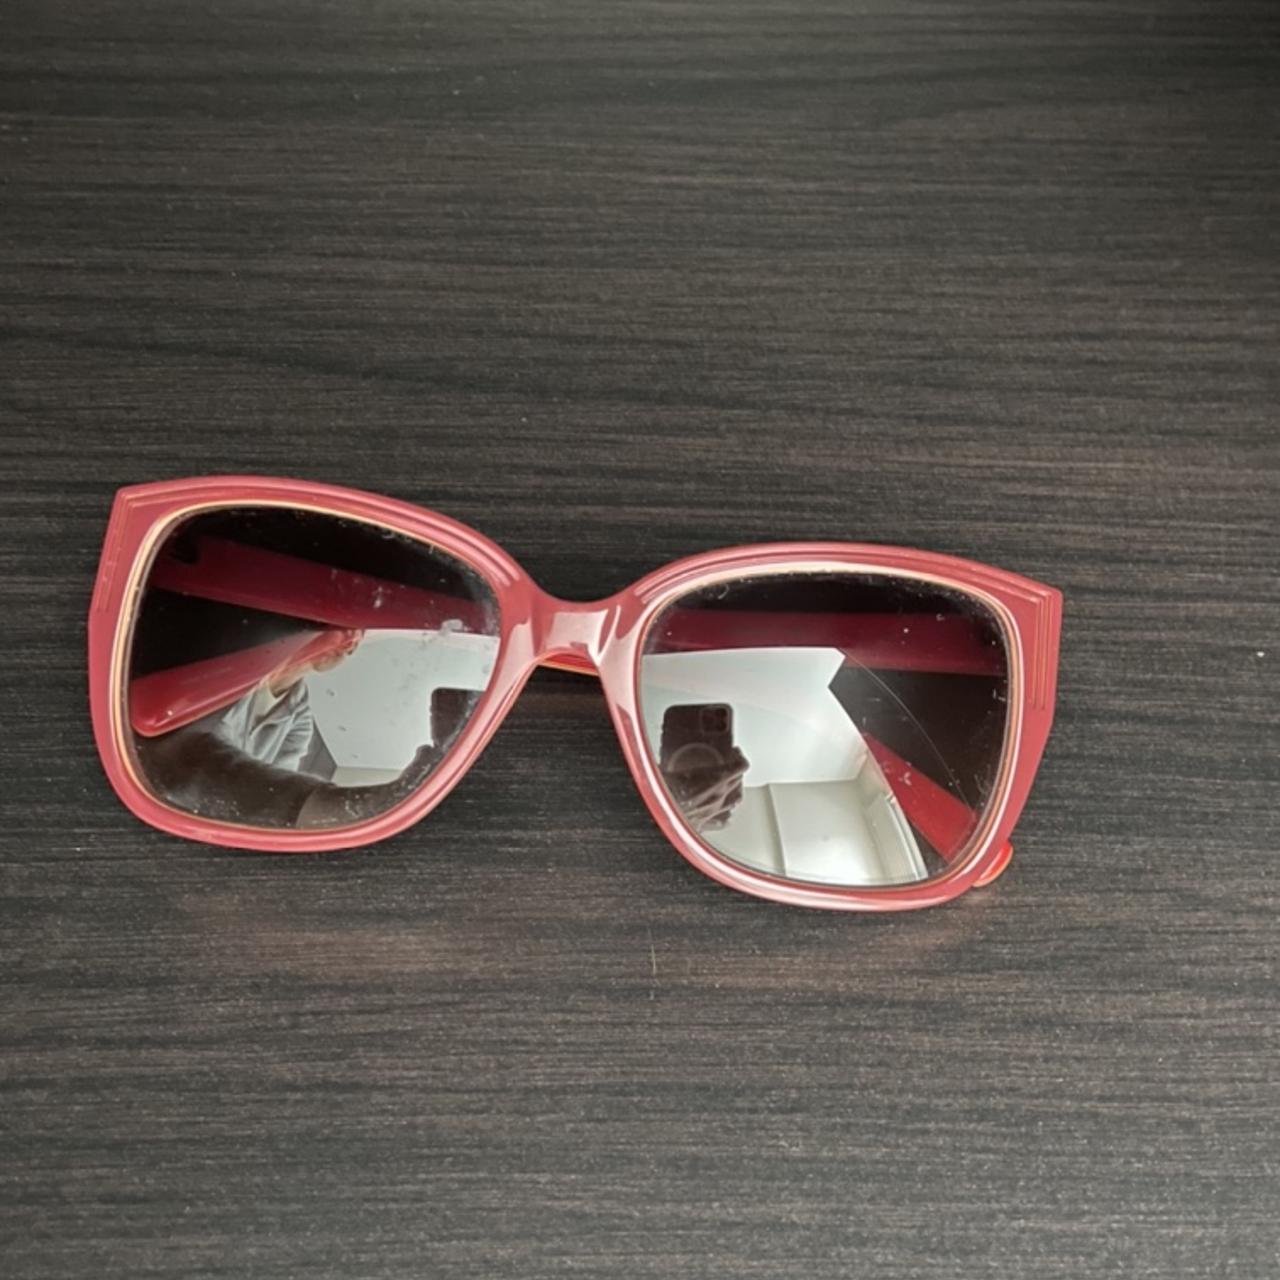 Marc Jacobs Women's Red and Burgundy Sunglasses